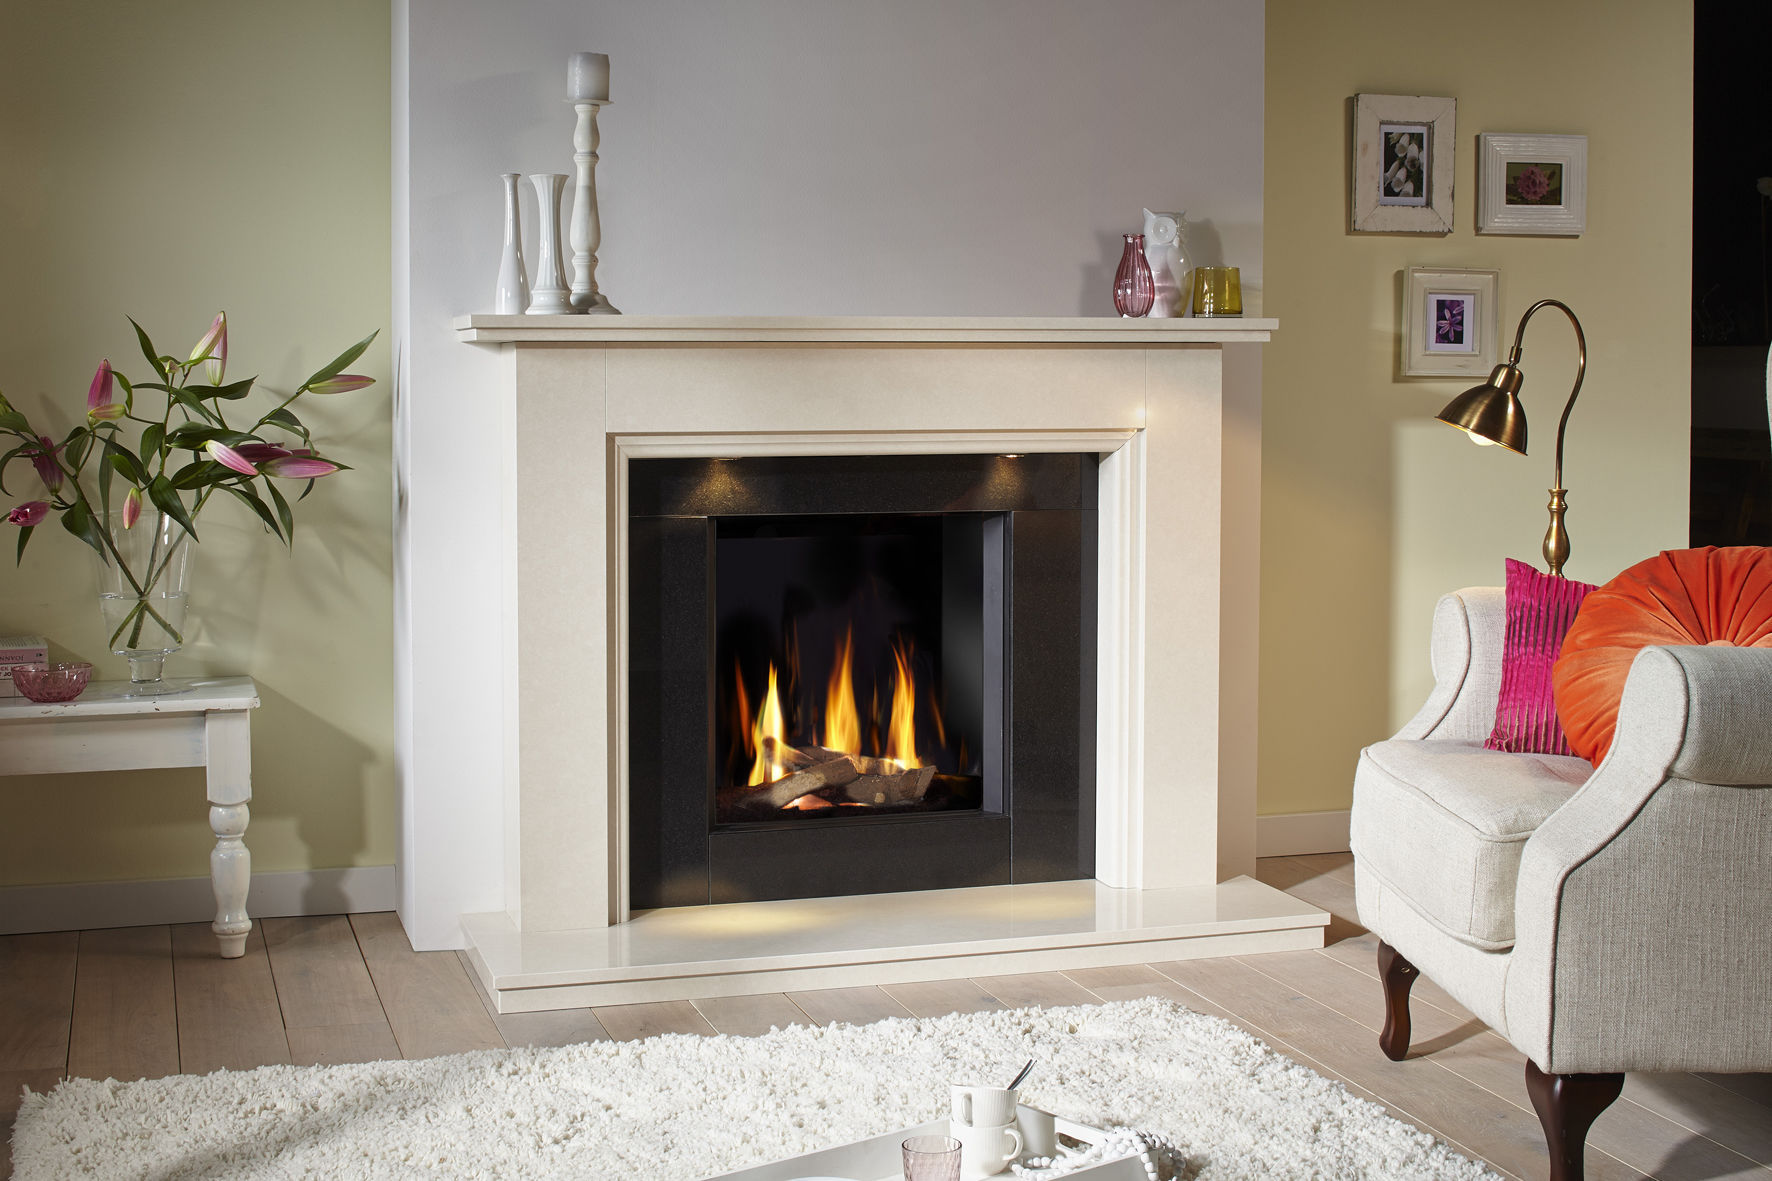 Gas-fireplaces-and-wood-burning. Top 10 Outdated Home Decorating Trends to Avoid in 2022